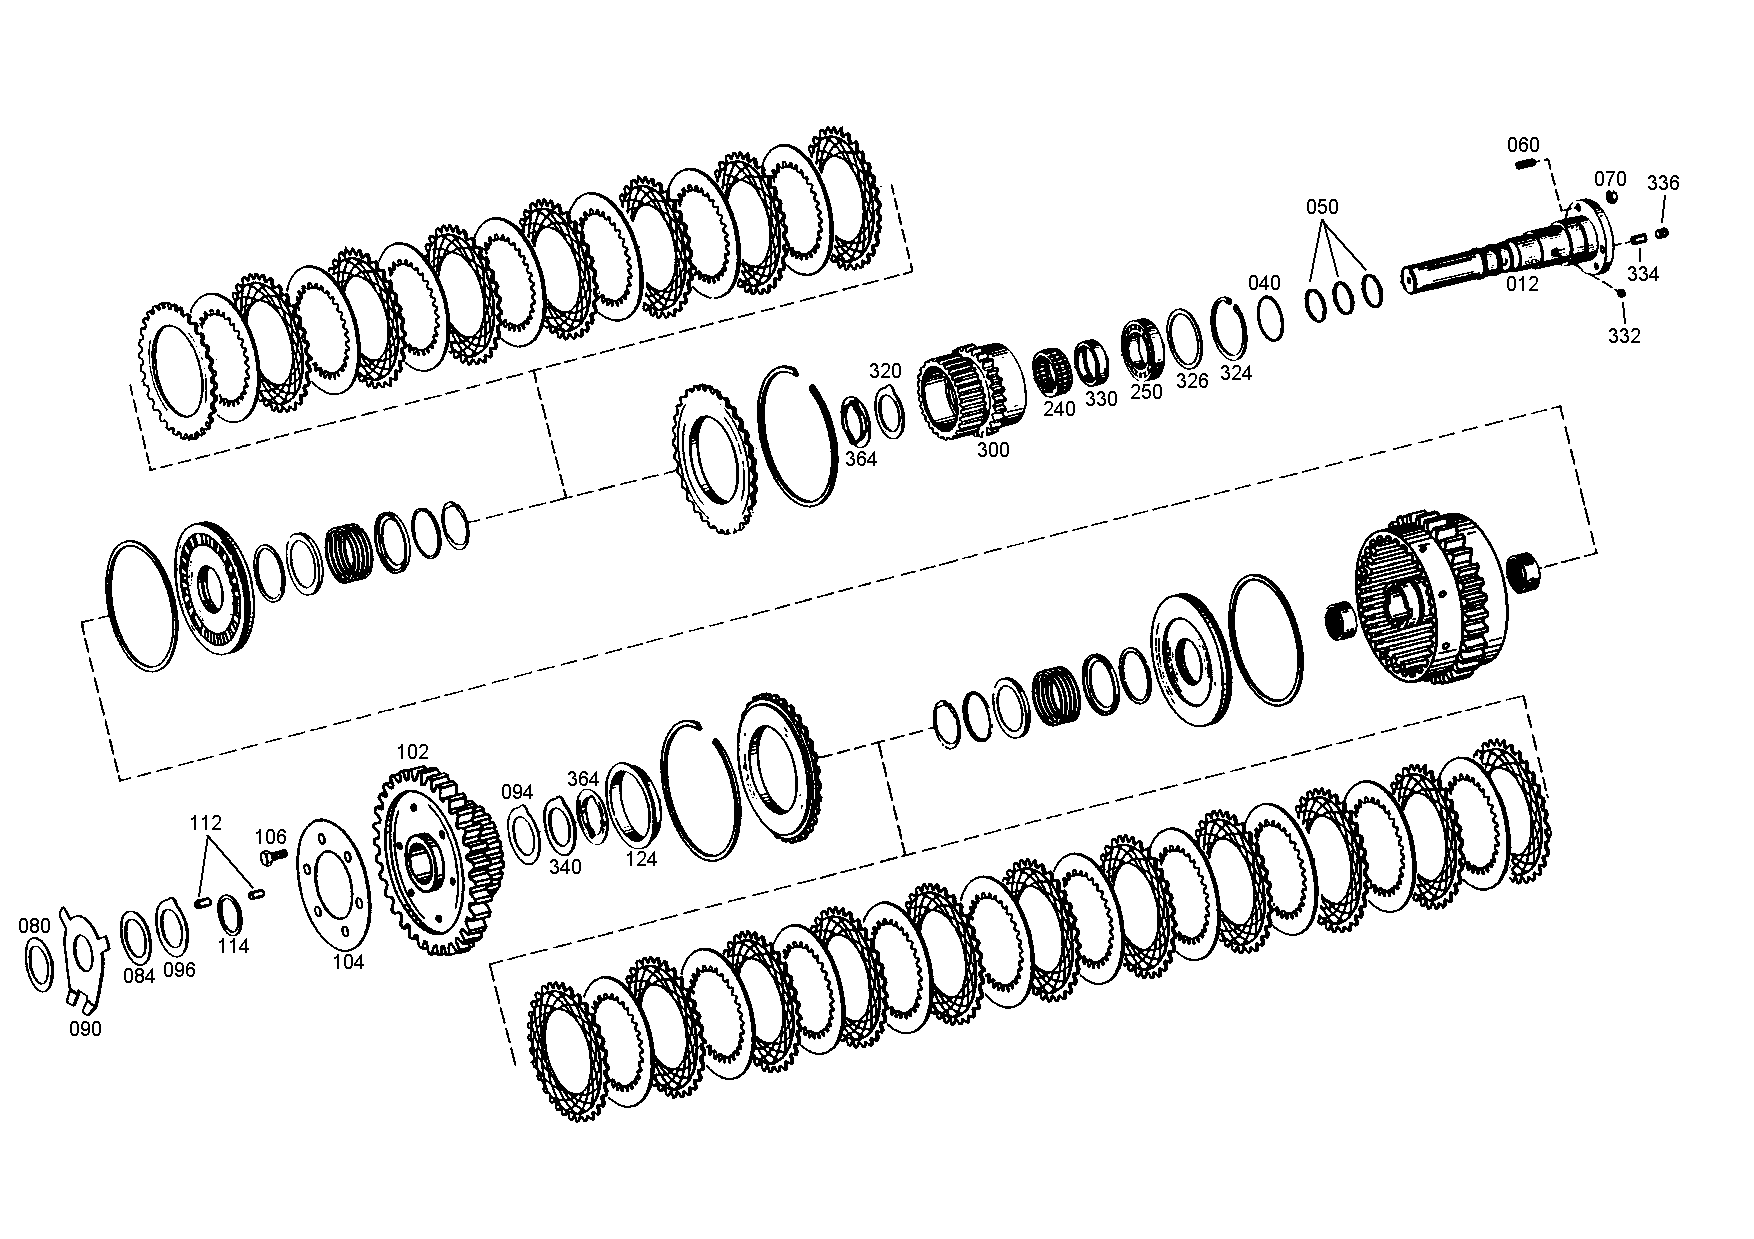 drawing for ATOY OY ATOCO 054 - CYLINDER ROLLER (figure 2)